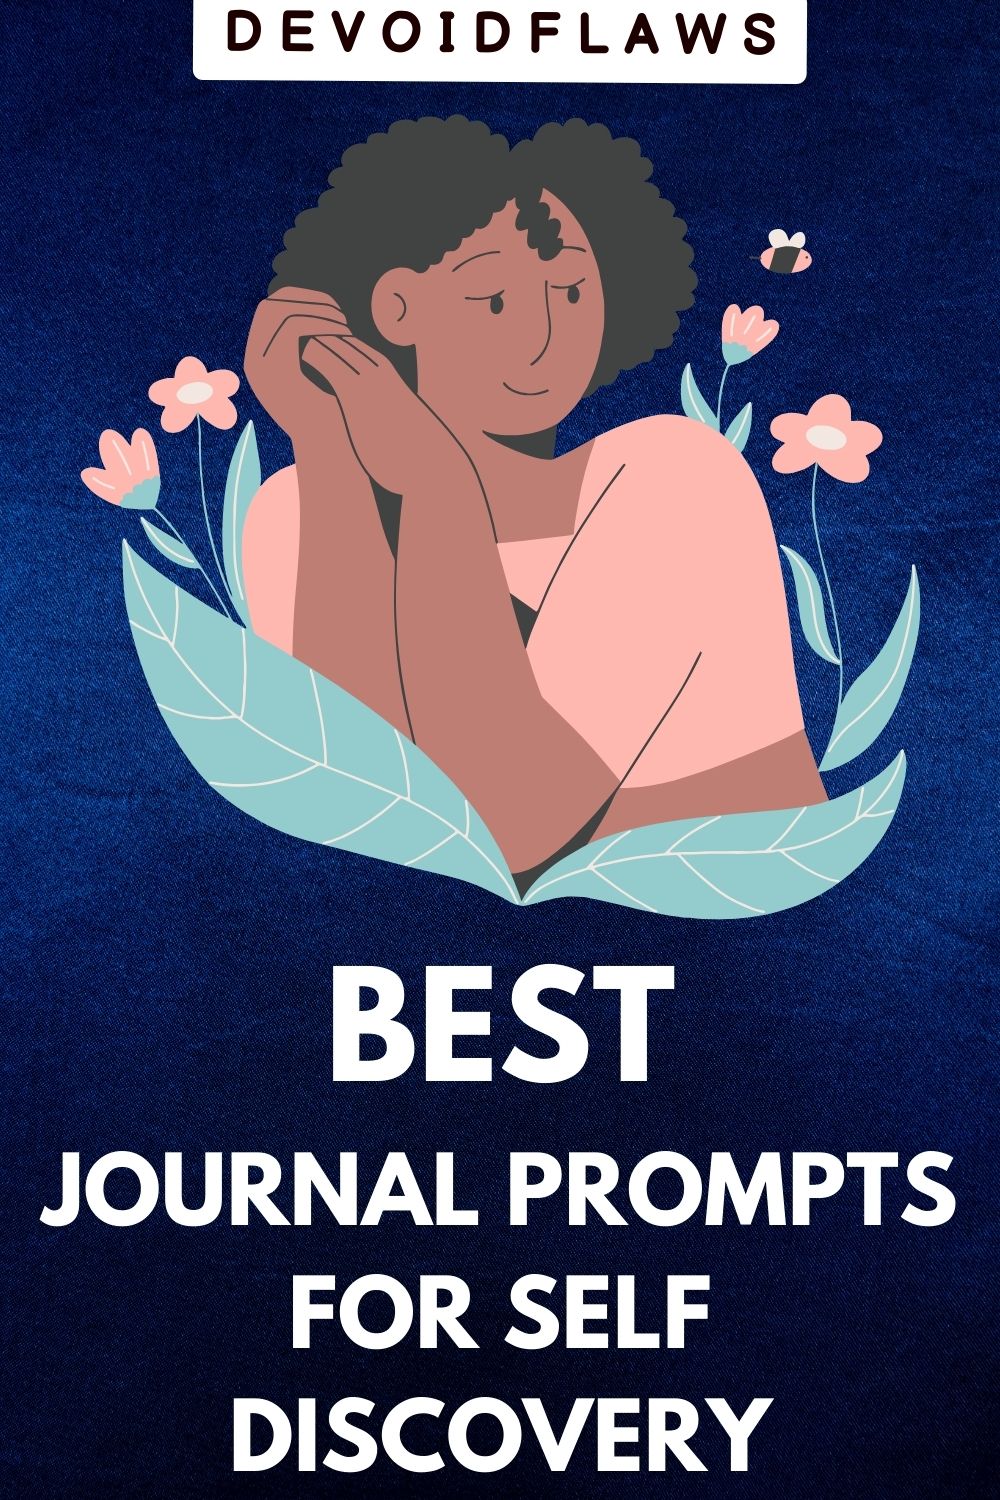 image with text - best journal prompts for self discovery